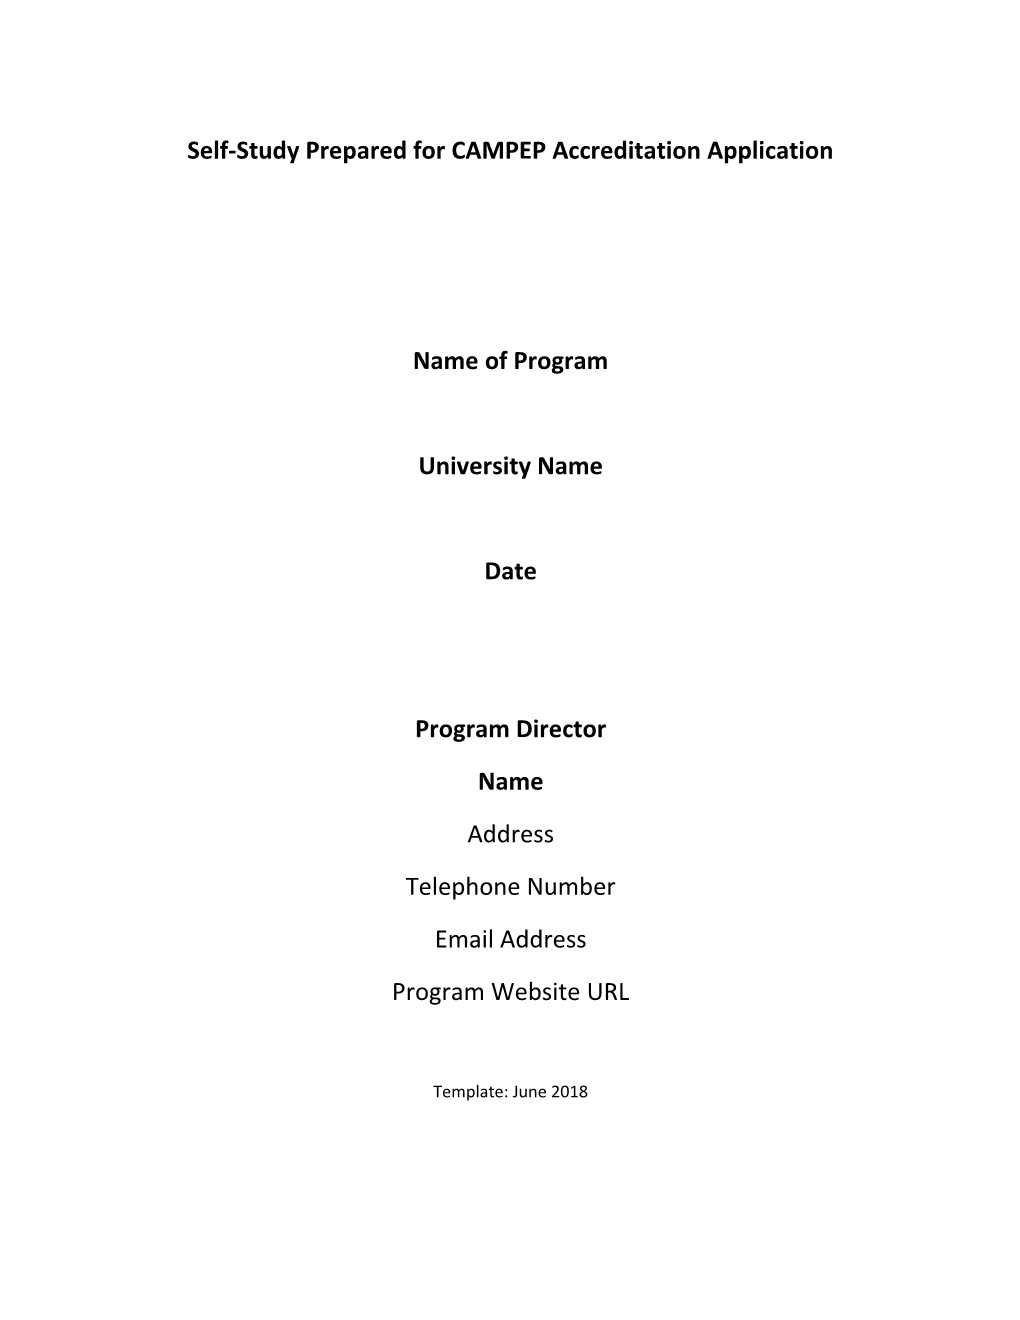 Self-Study Prepared for CAMPEP Accreditation Application